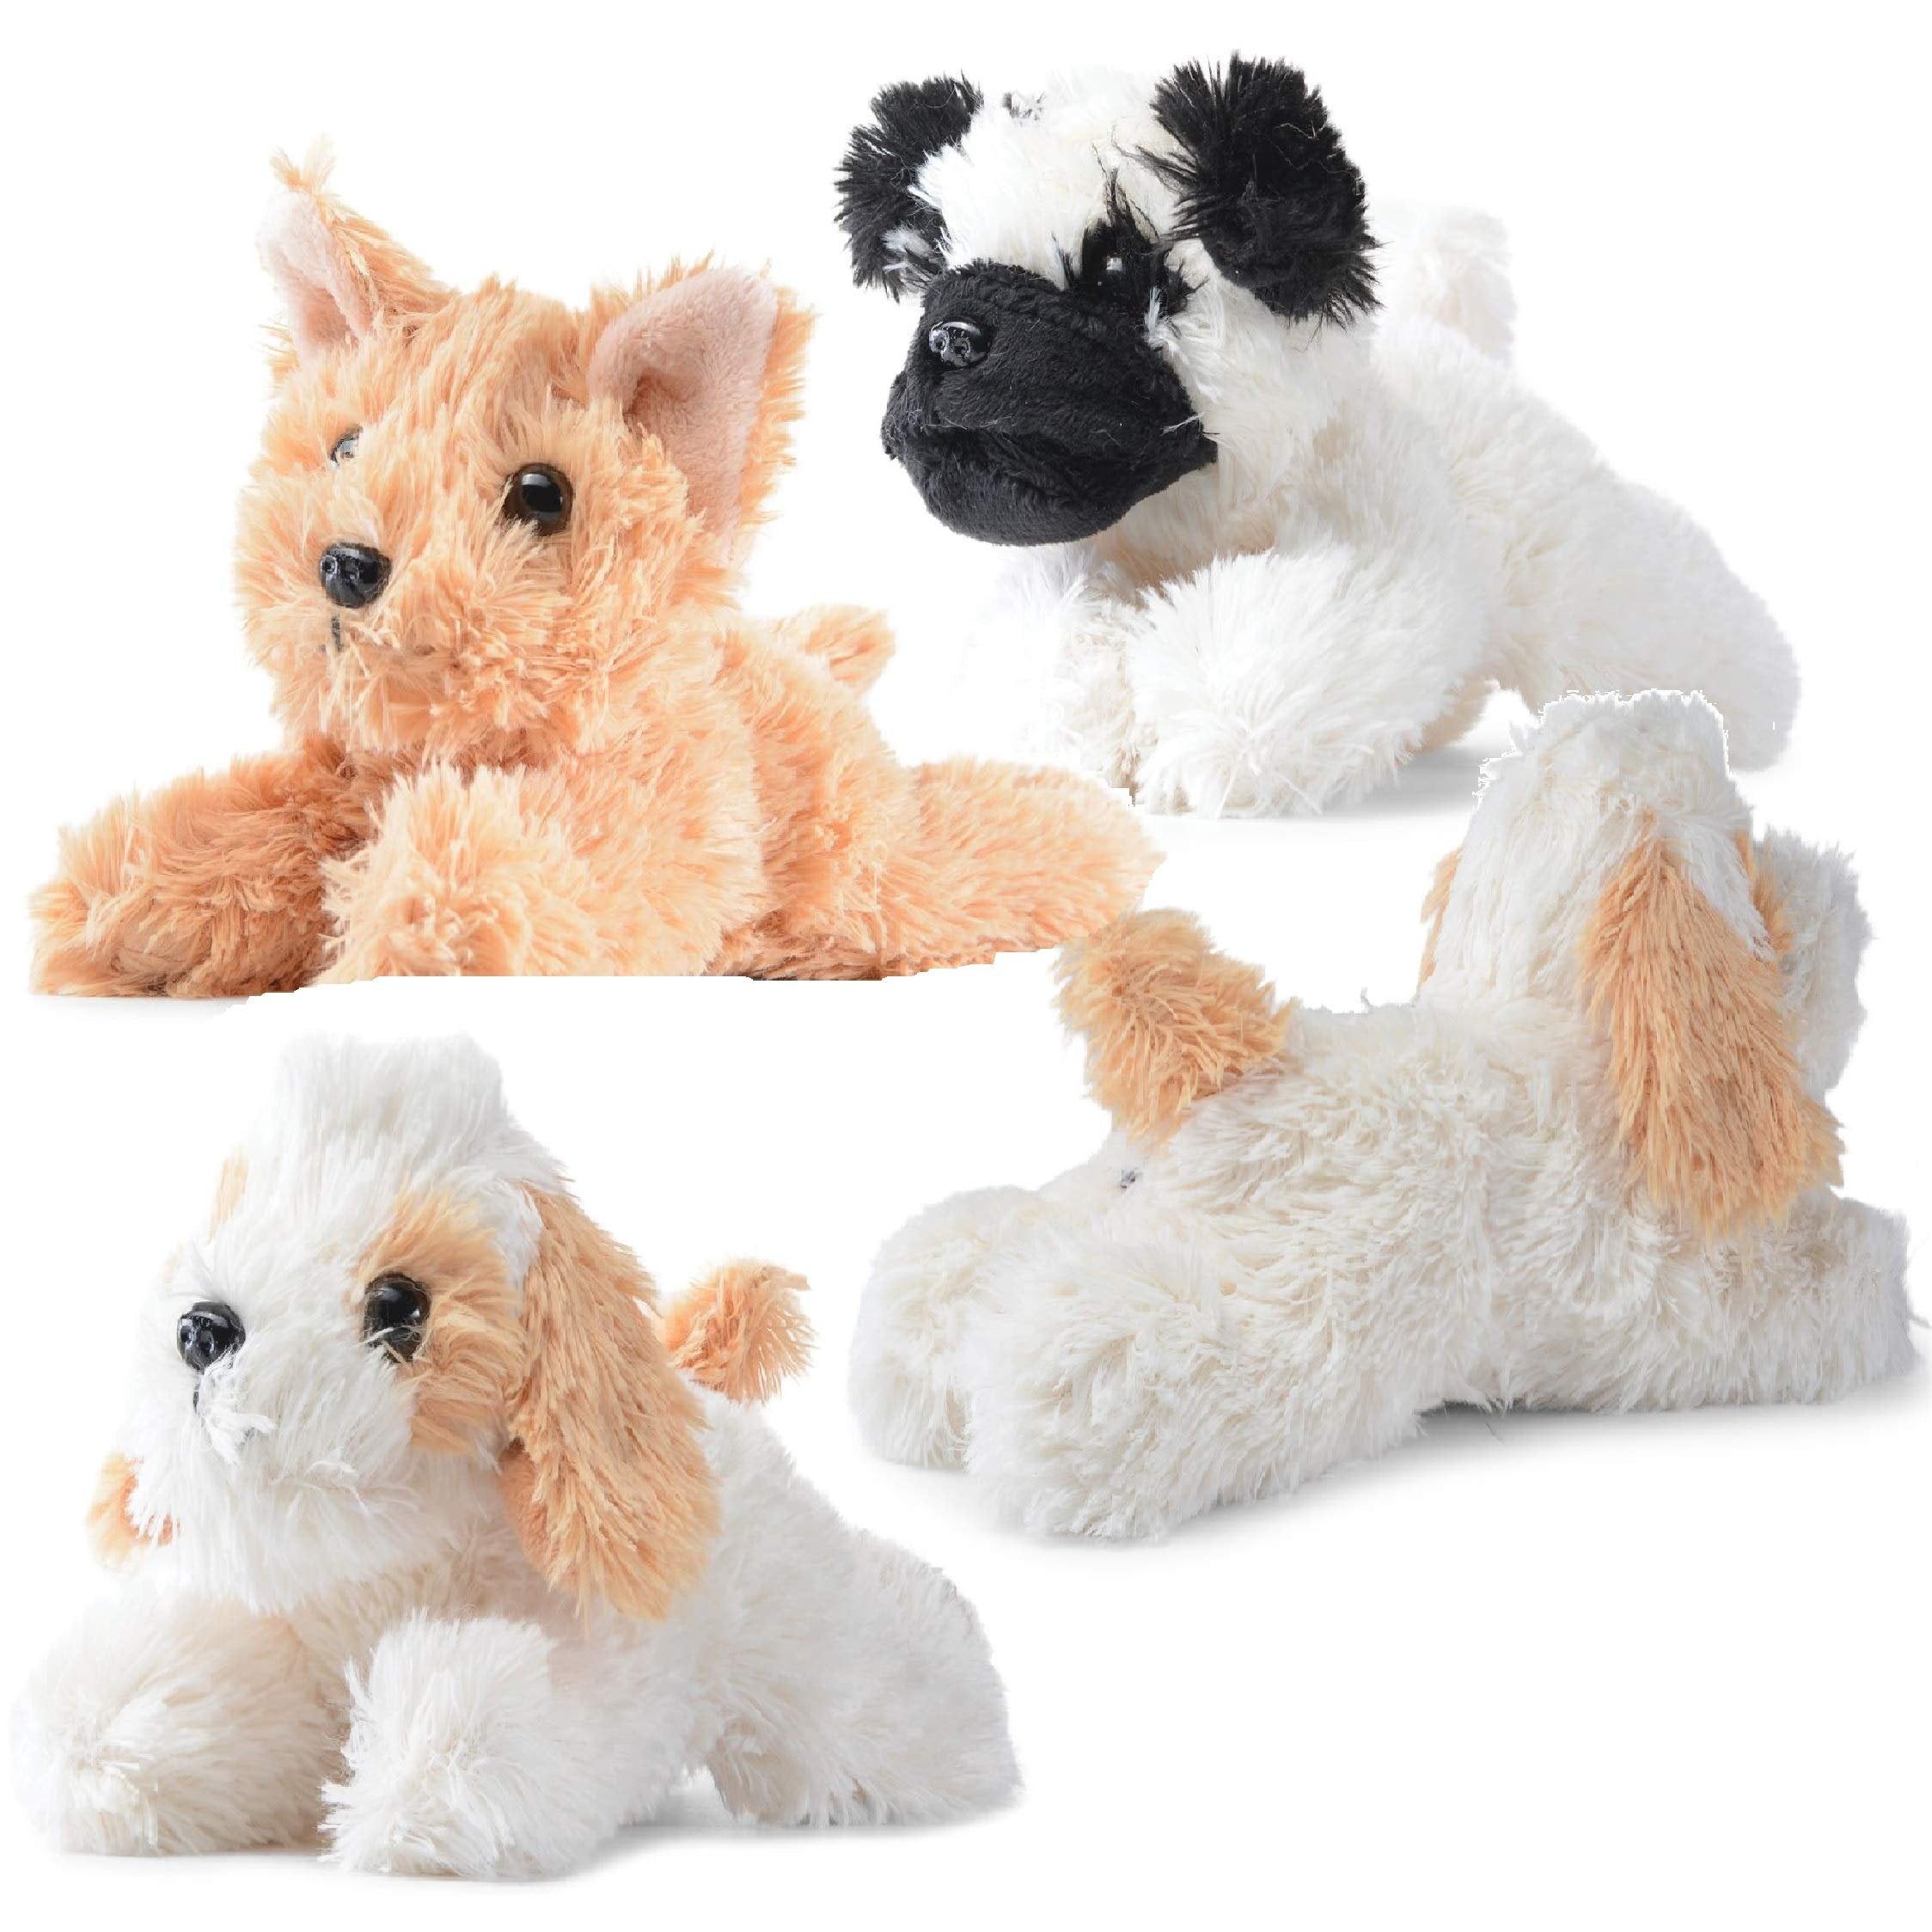 PREXTEX Stuffed Puppies - Set of 4 Cute Dog Toy Stuffed Animals for Girls and Boys | 6 Inch Small Plushies | Plush Dogs Stuff Animals for Puppy Party Favors | Small Stuffed Animals Puppy Toys for Kids